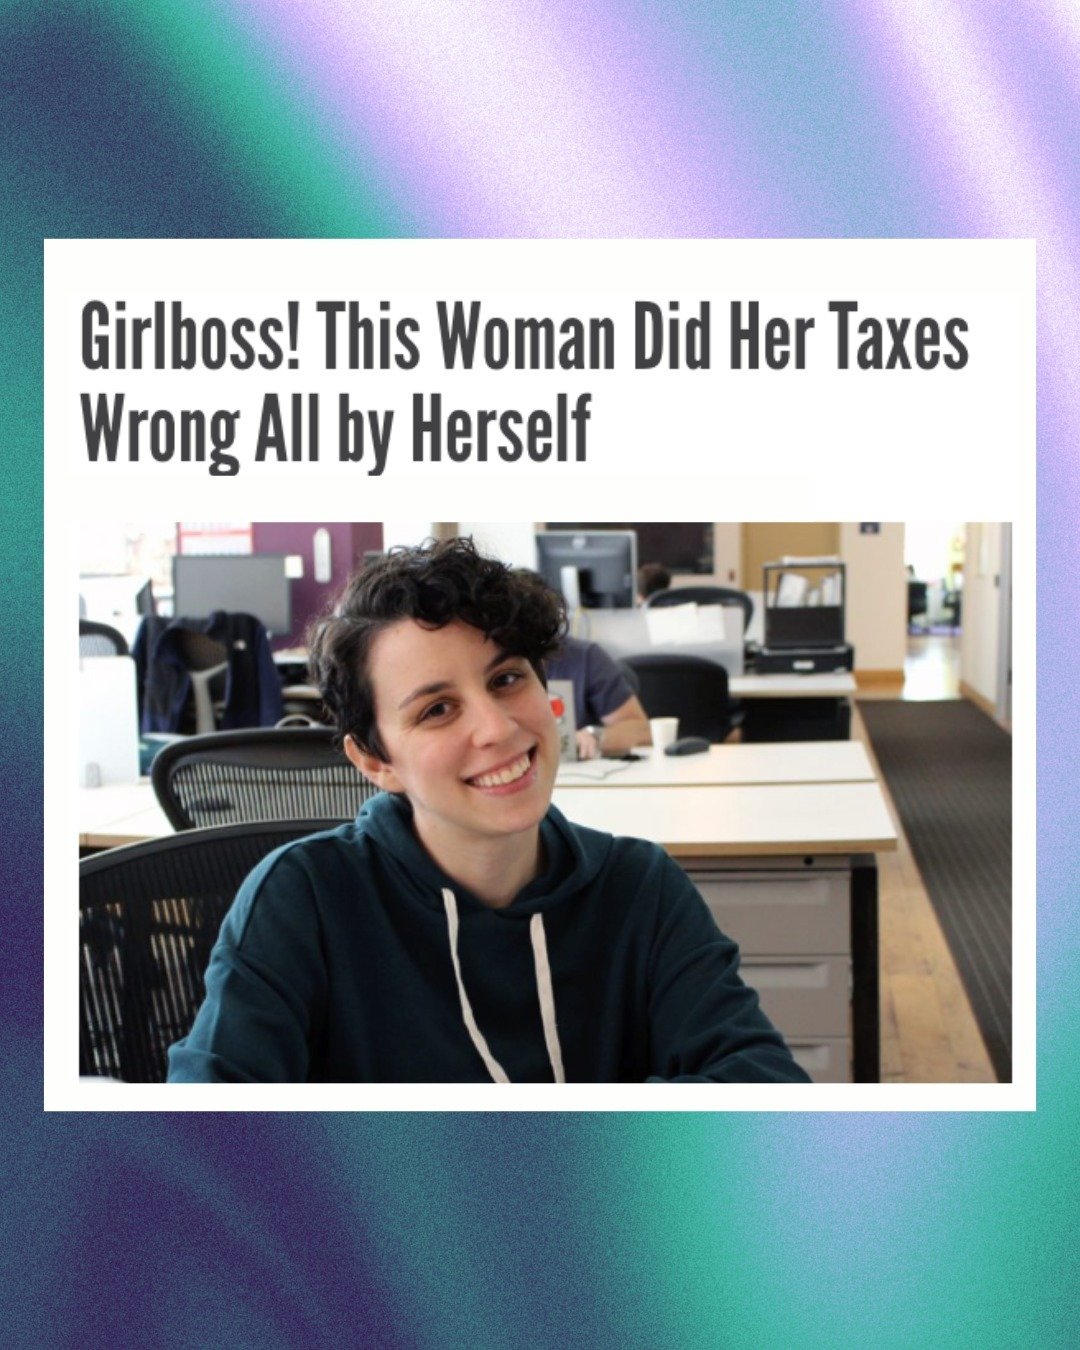 It&rsquo;s tax season 🎉 just kidding 😭

Here are our favorite @reductress headlines to get you through April 15th&hellip;

Tag yourself, we are slide 4 🤭